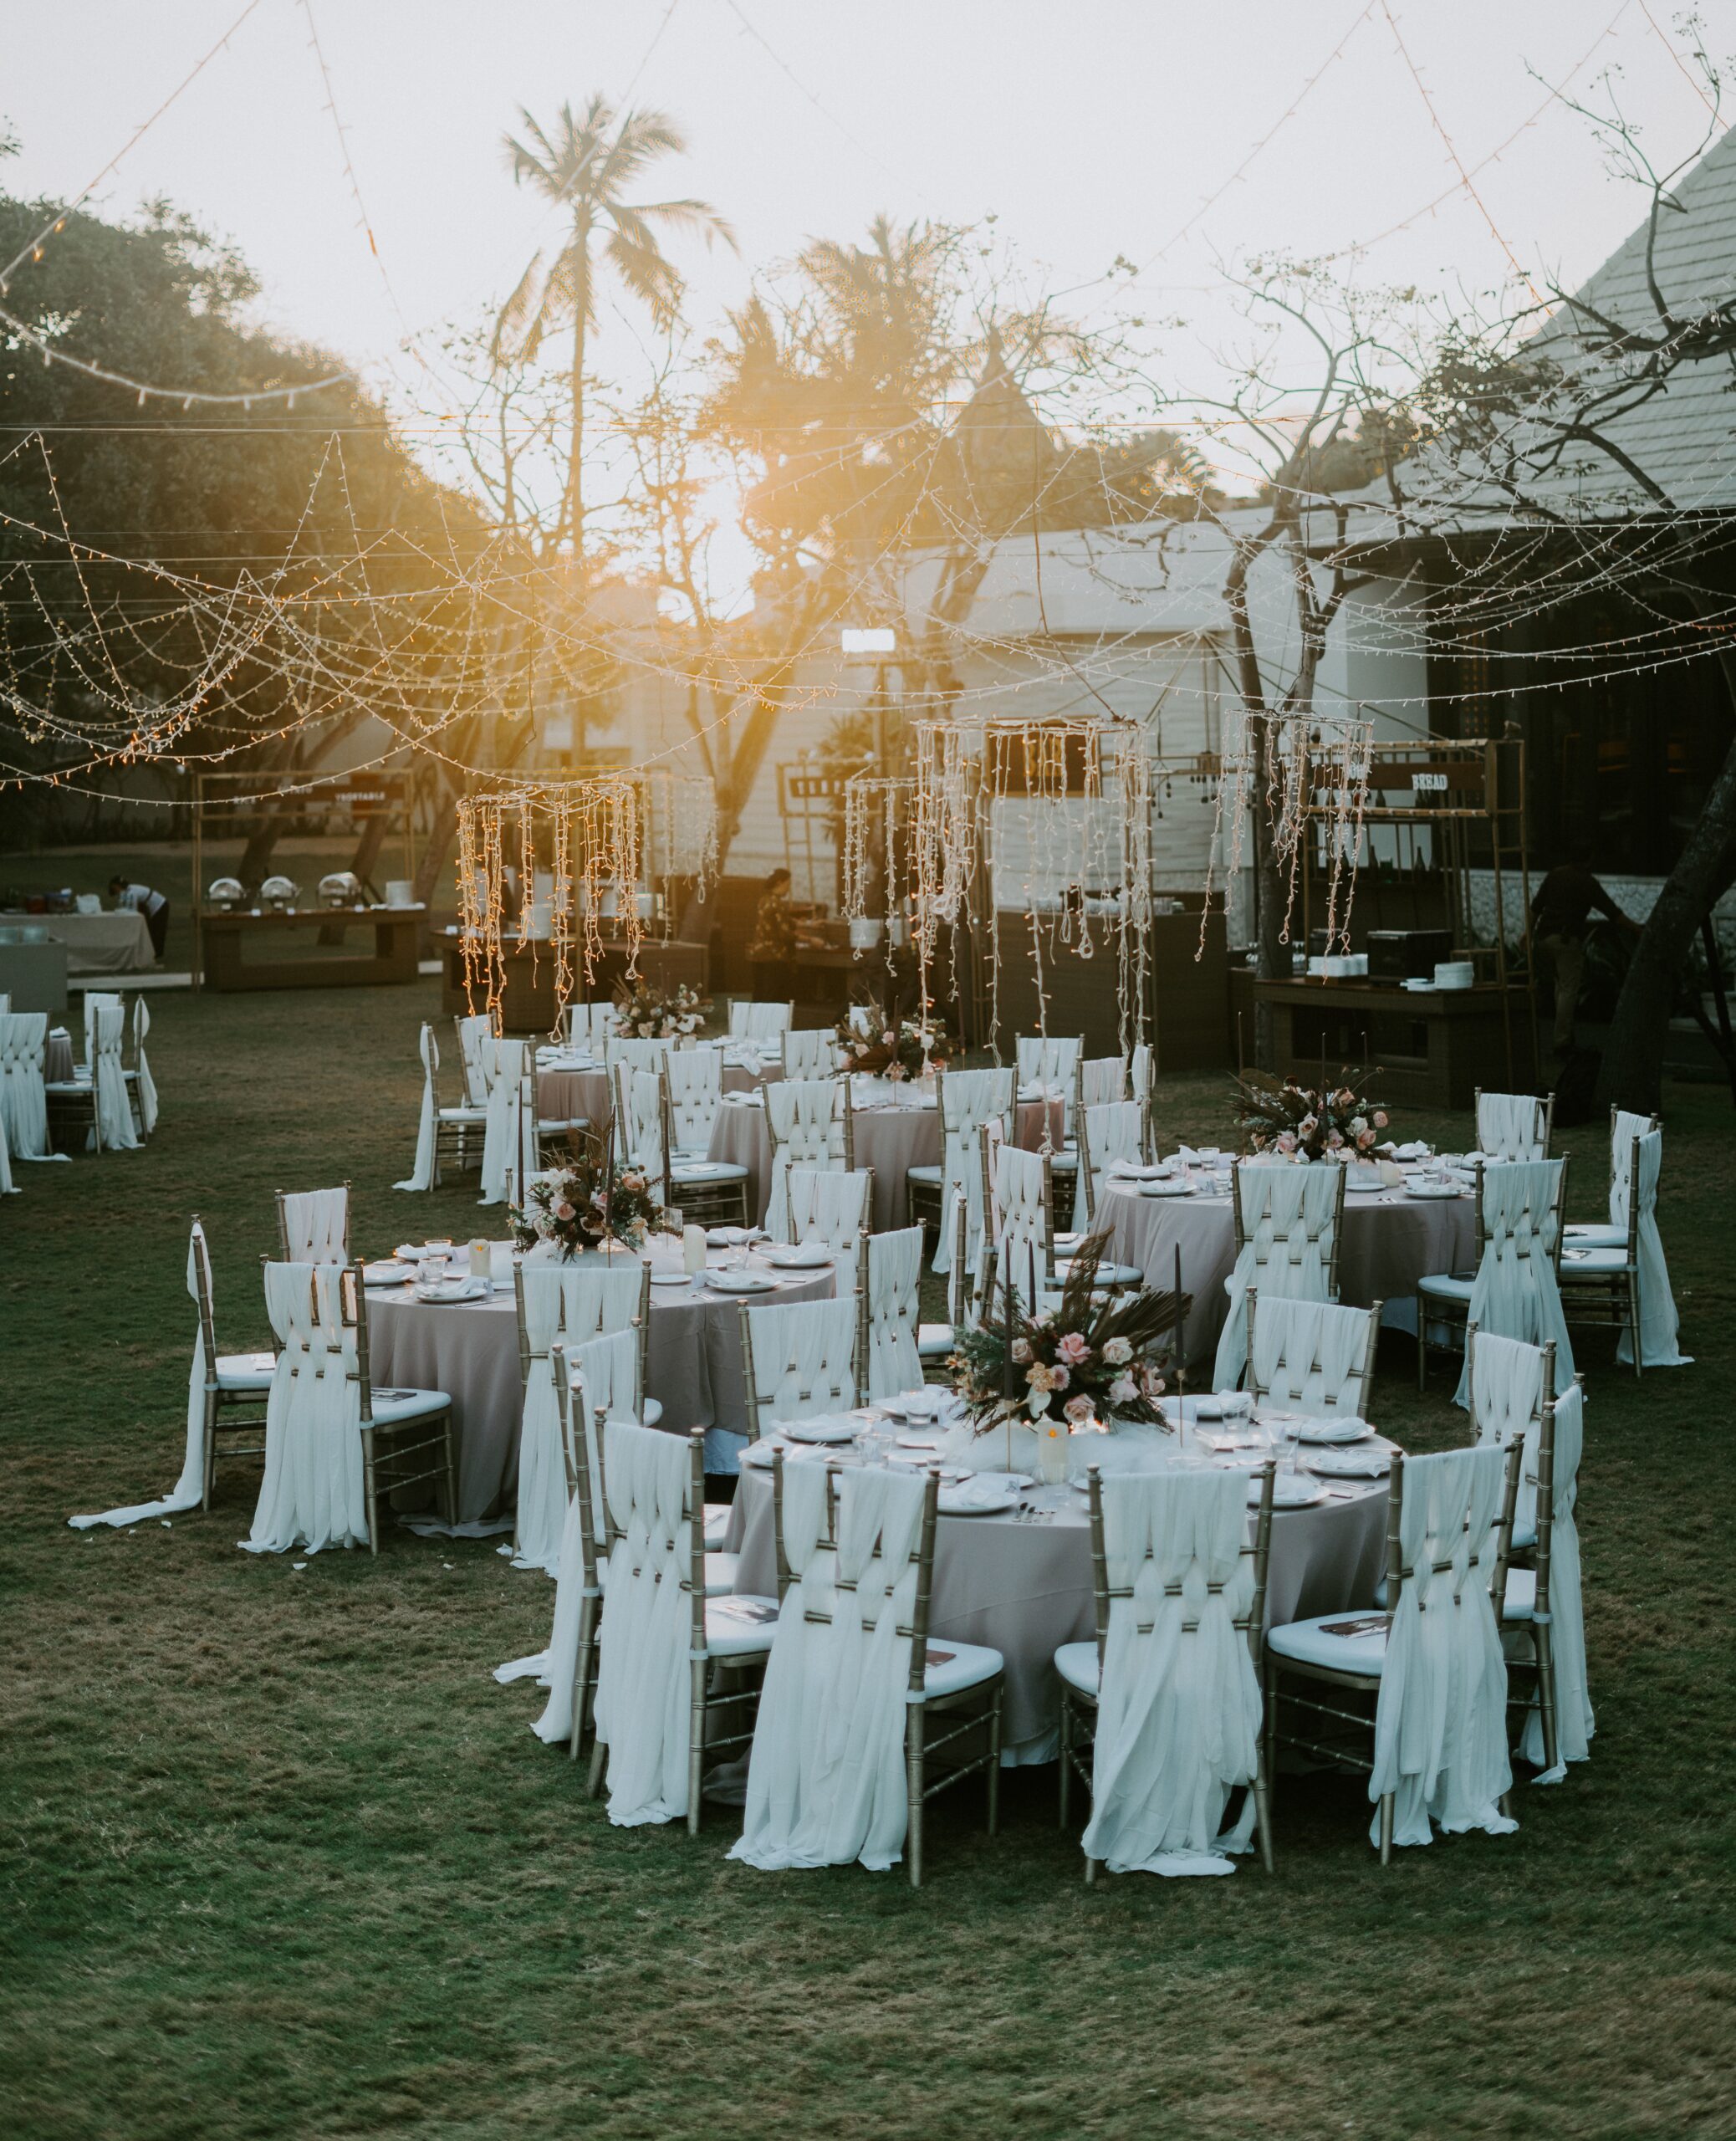 Tables set for a small, intimate wedding dinner in an outdoor setting